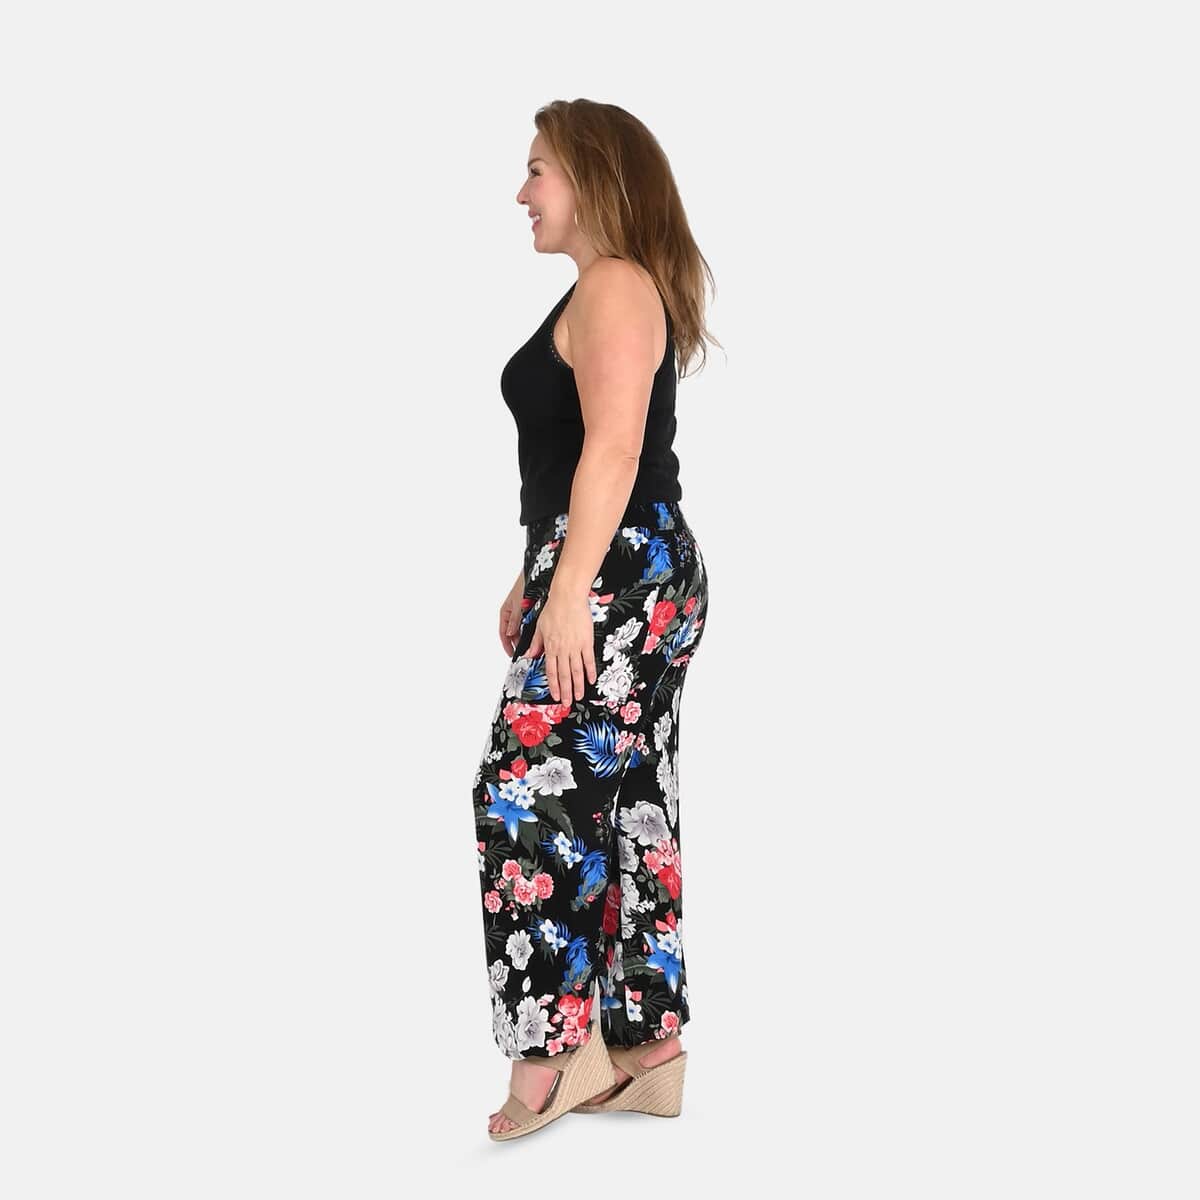 Tamsy Black Rose Smocked Waist Harem Pant with 2 Pockets - One Size Fits Most image number 2